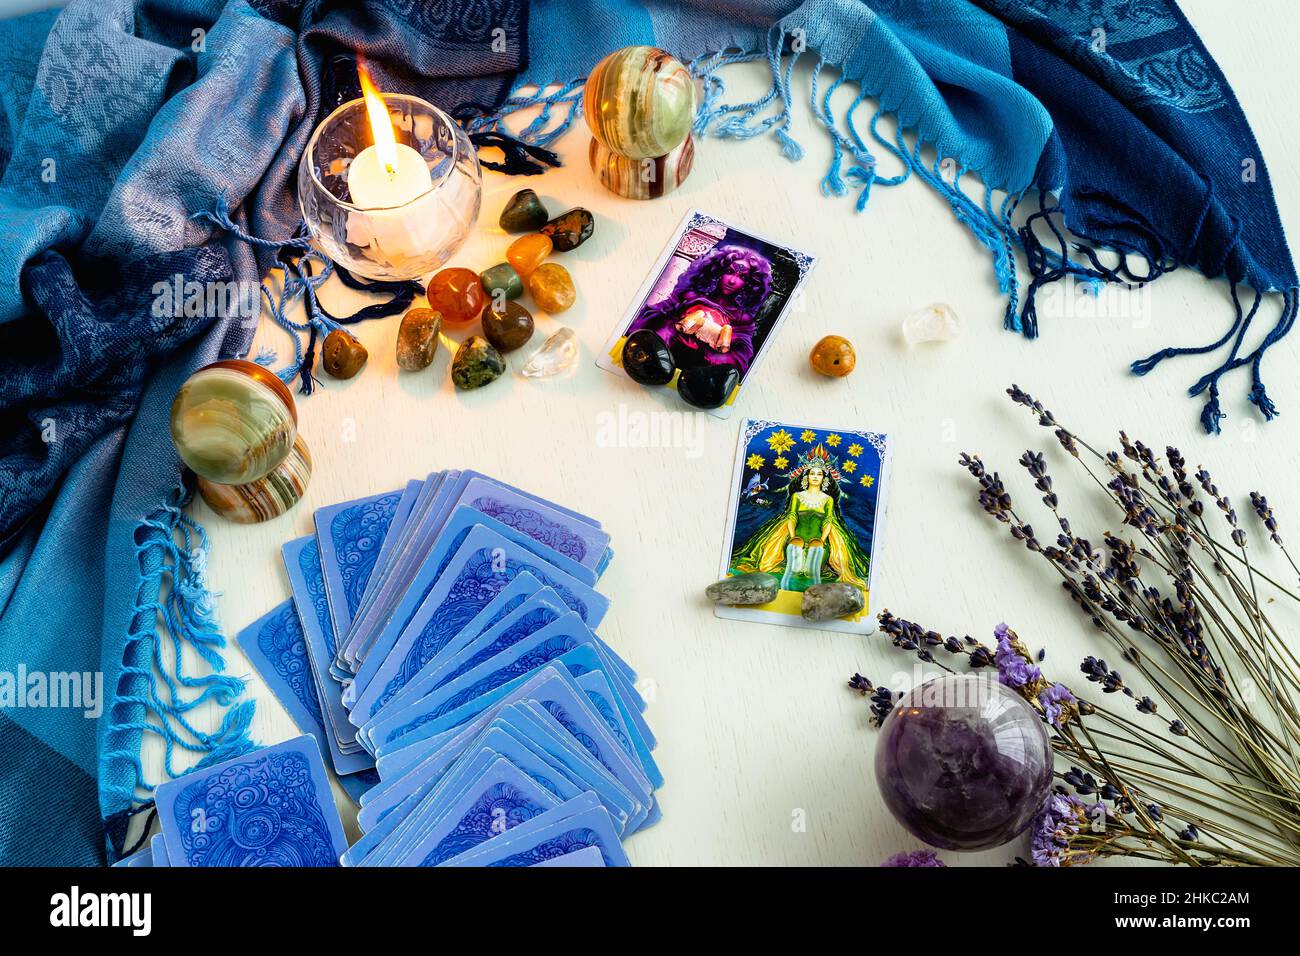 Minsk, Belarus - February 2022: star and priestess cards in tarot divination with candles and stones on a light table with dried flowers and a blue ta Stock Photo